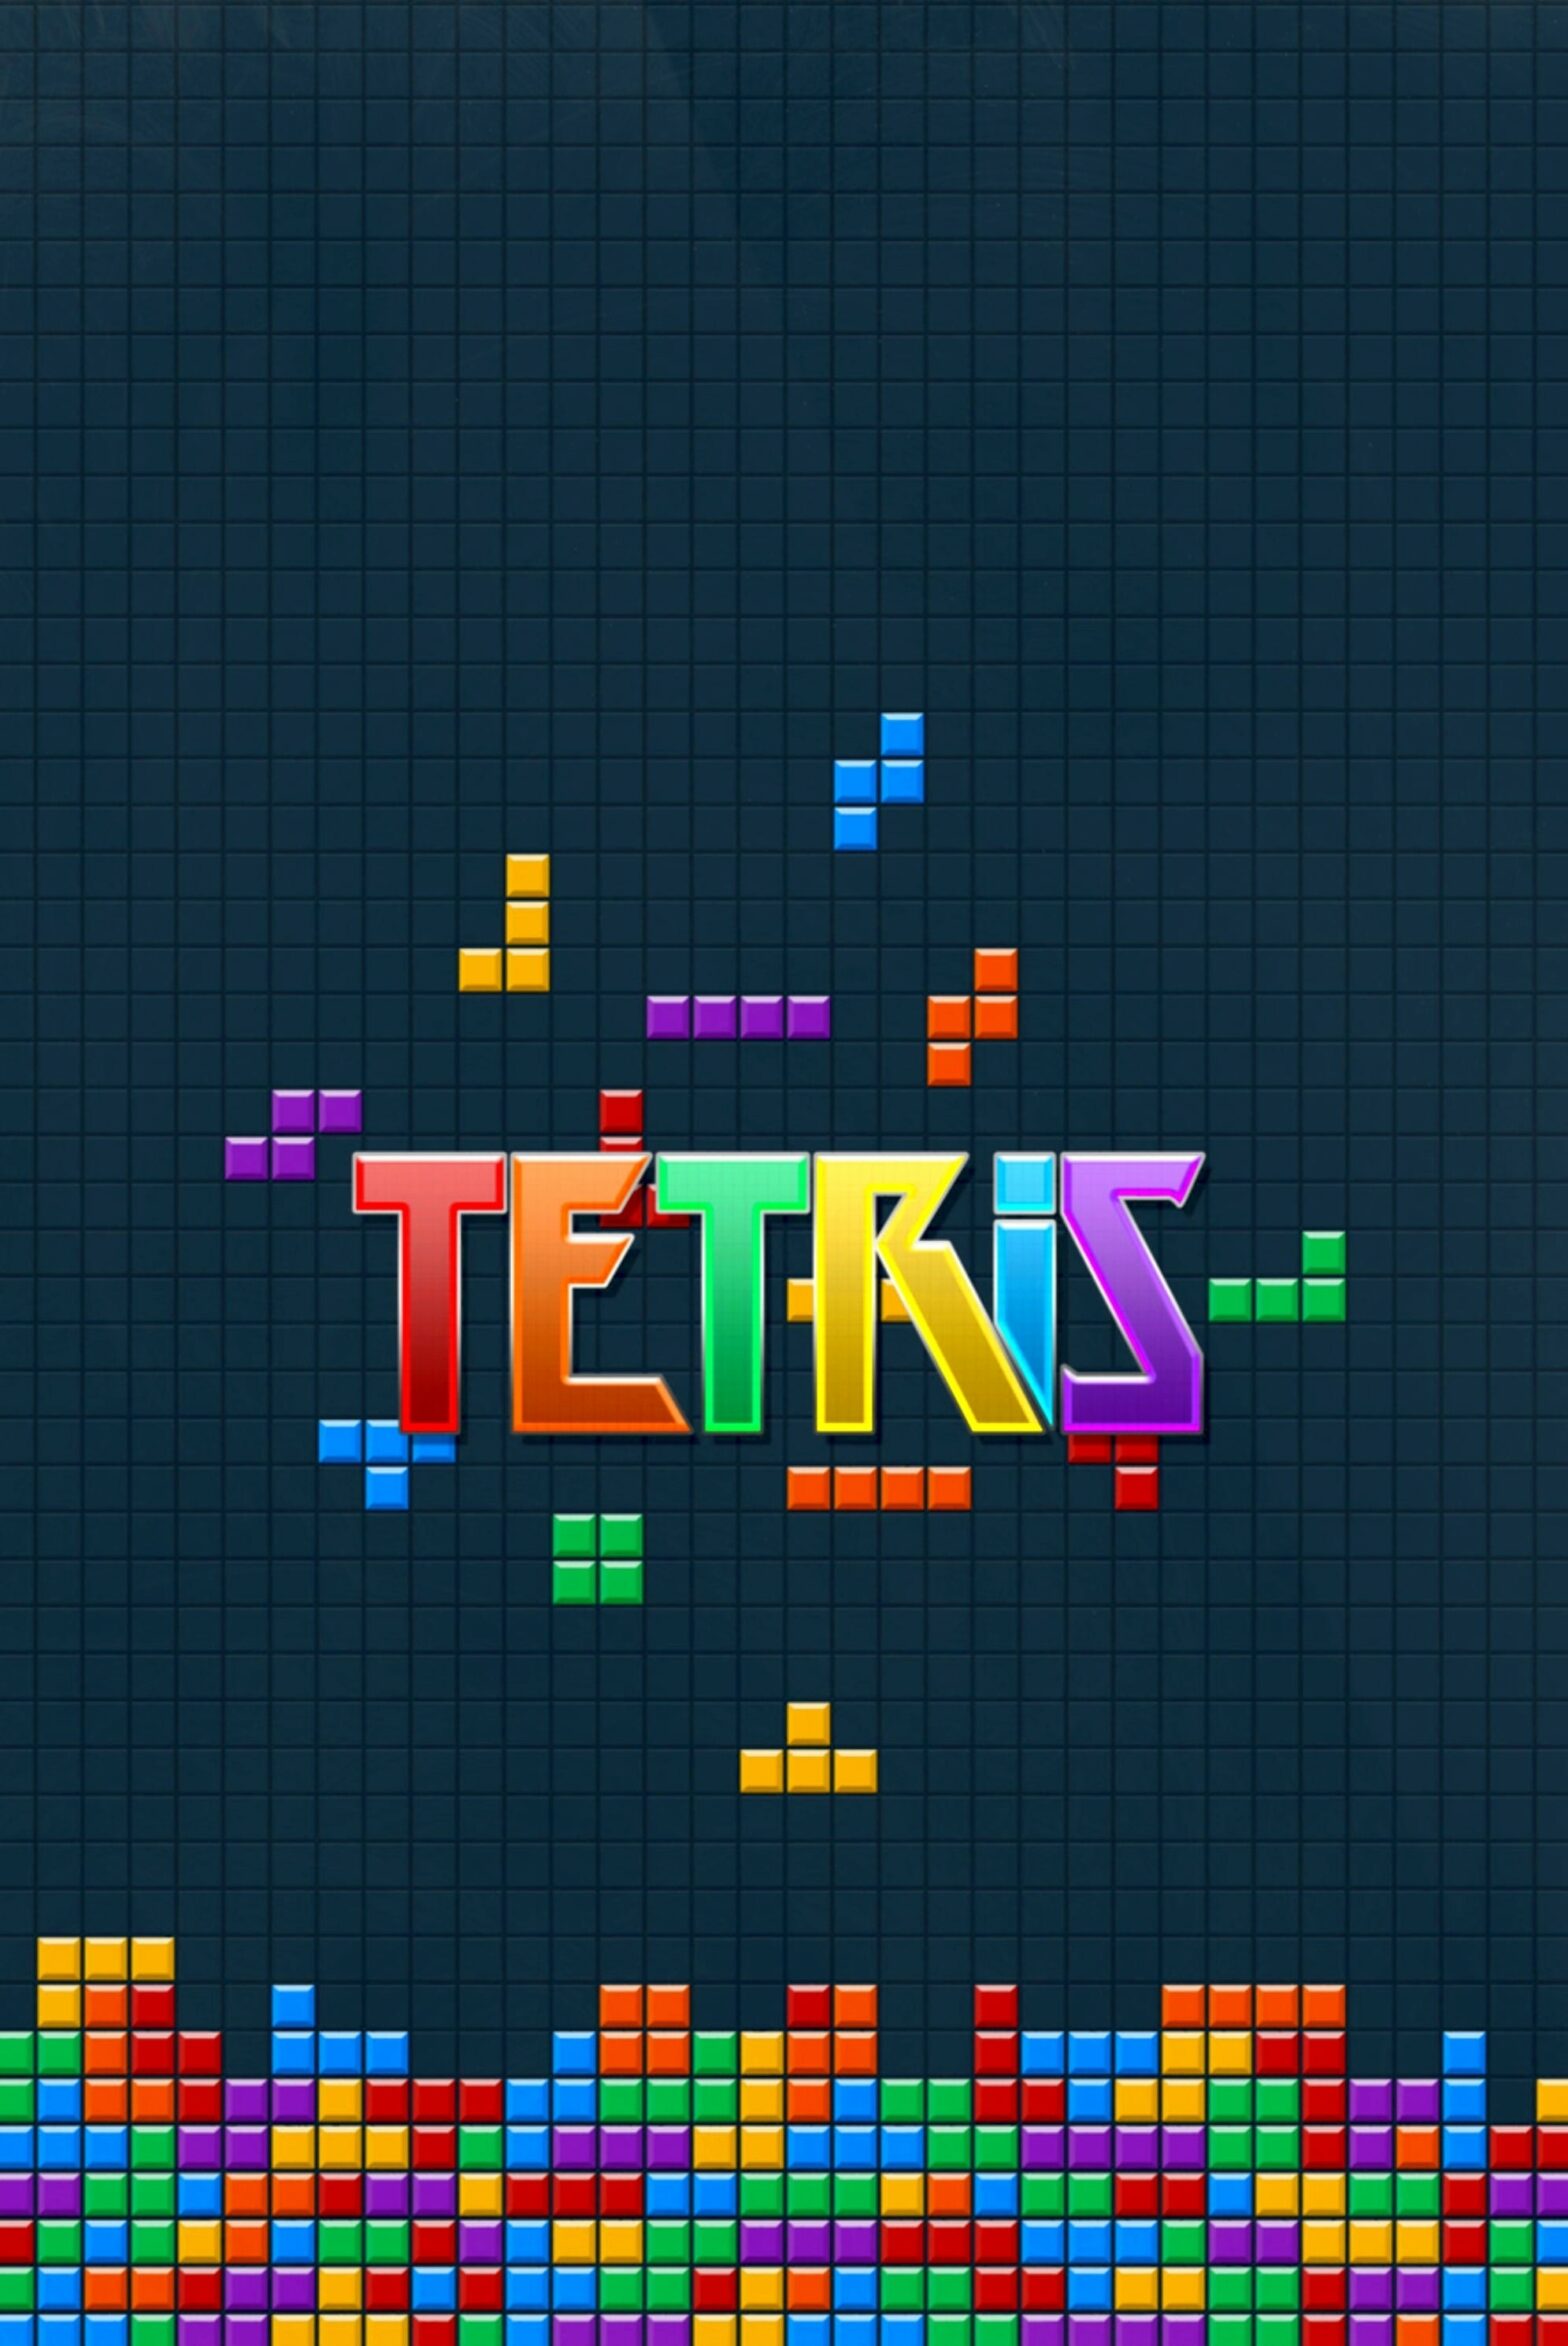 Poster for the movie "Tetris"